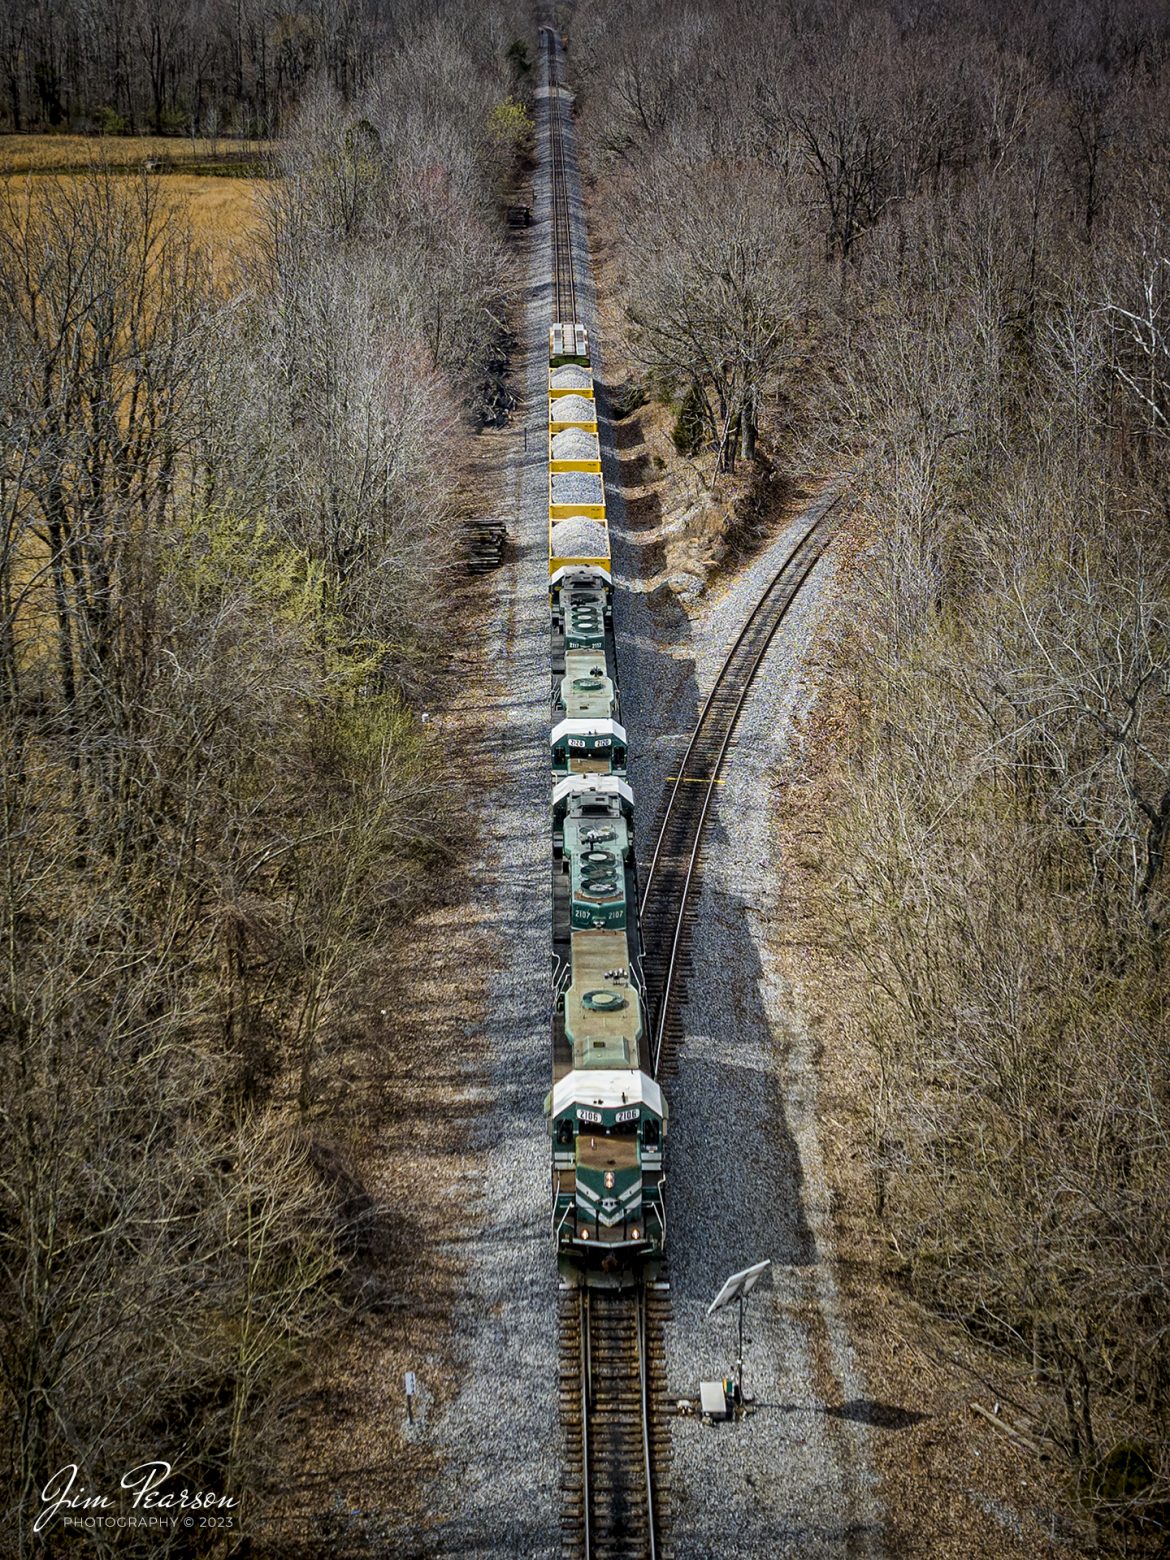 Paducah and Louisville Railway local WW1 passes the Warrior Coal lead as it heads north, approaching West Yard at Madisonville, Ky on March 2nd, 2023, on the Paducah and Louisville Railway with a short string of rock cars, heading for Central City, Ky.

Tech Info: DJI Mavic 3 Classic Drone, RAW, 24mm, f/2.8, 1/1600, ISO 120.

#trainphotography #railroadphotography #trains #railways #dronephotography #trainphotographer #railroadphotographer #jimpearsonphotography #kentuckytrains #pal #paducahandlouisvillerailway #shortlinerailroad #regionalrailroad